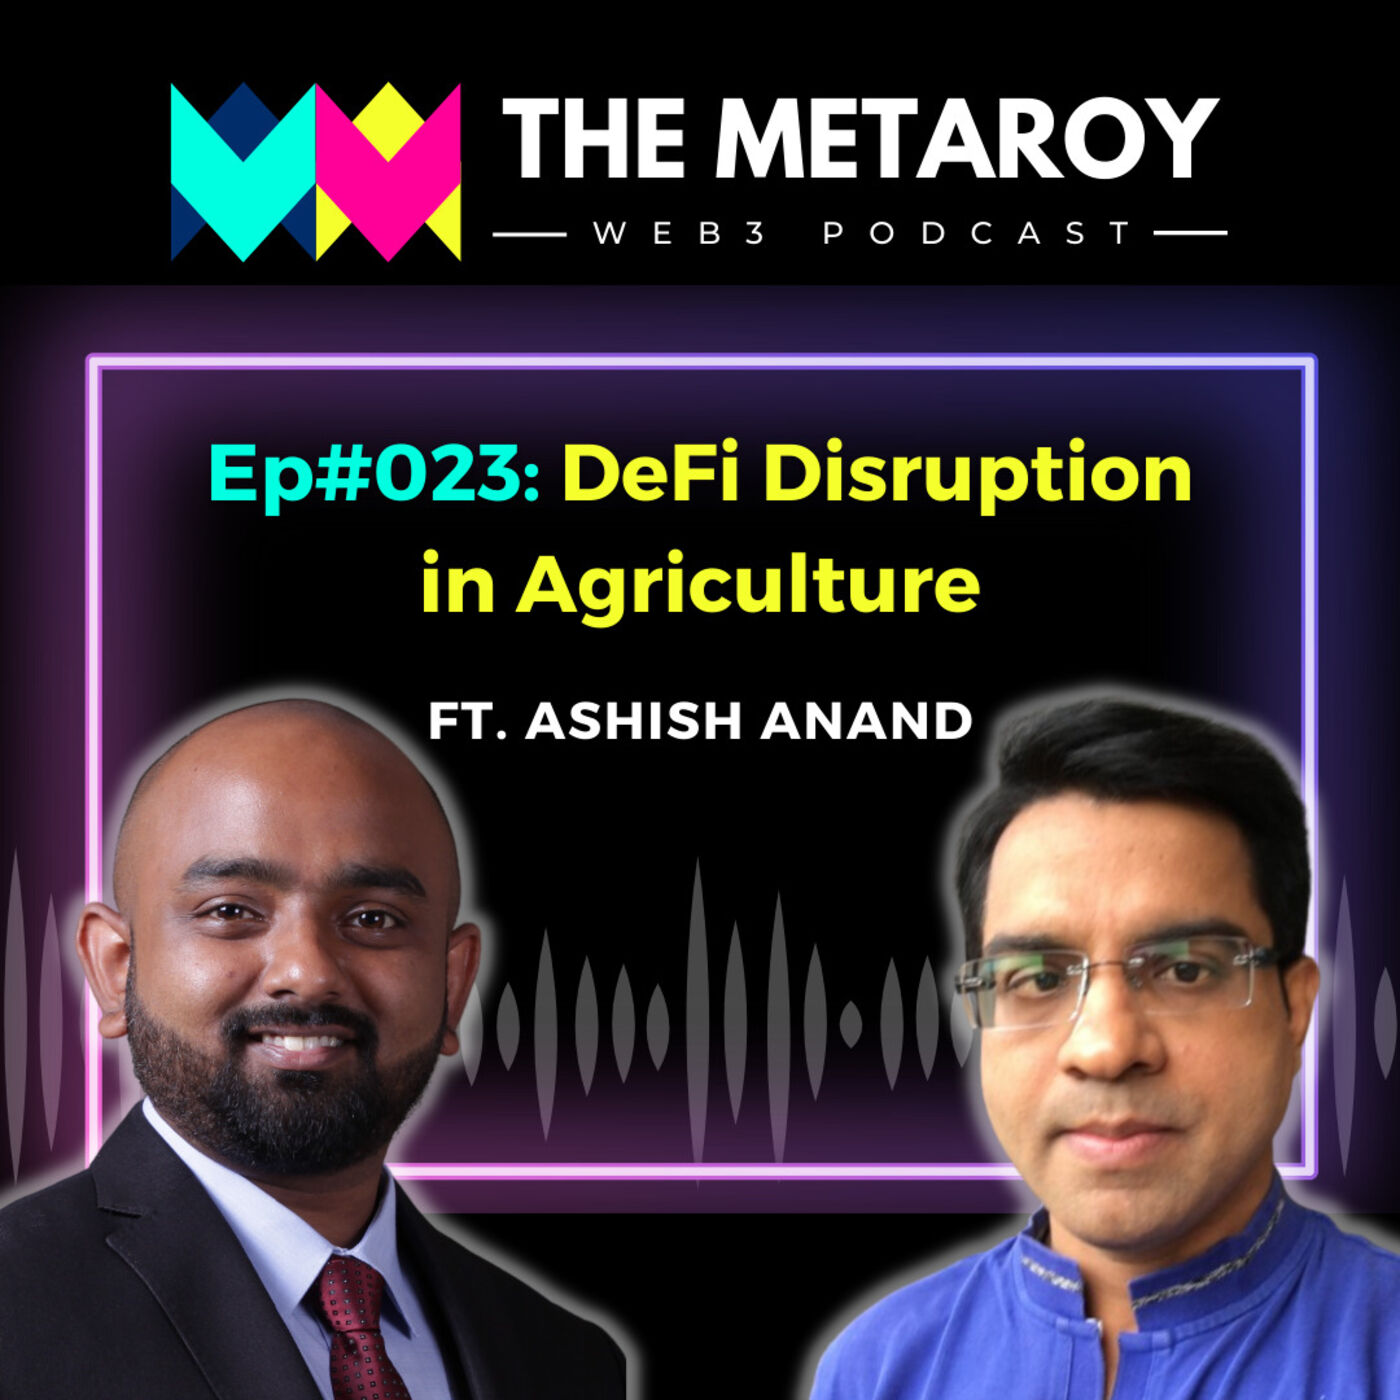 Ashish Anand: DeFi will Change India's Agriculture Sector Forever | Ep #023